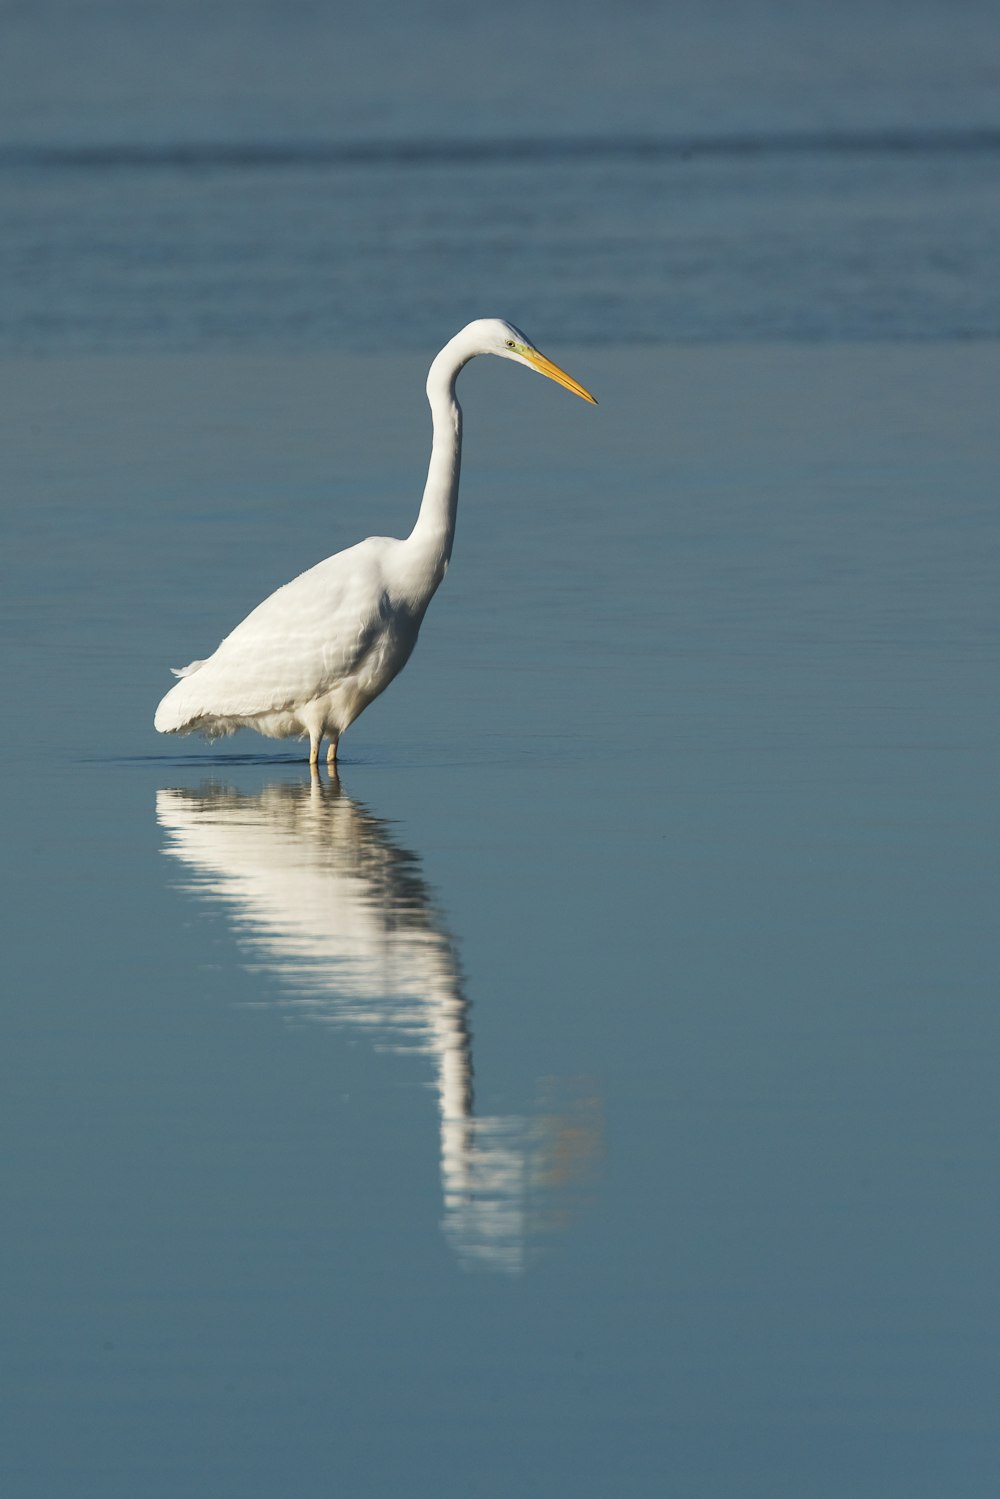 white great egret bird on body of water